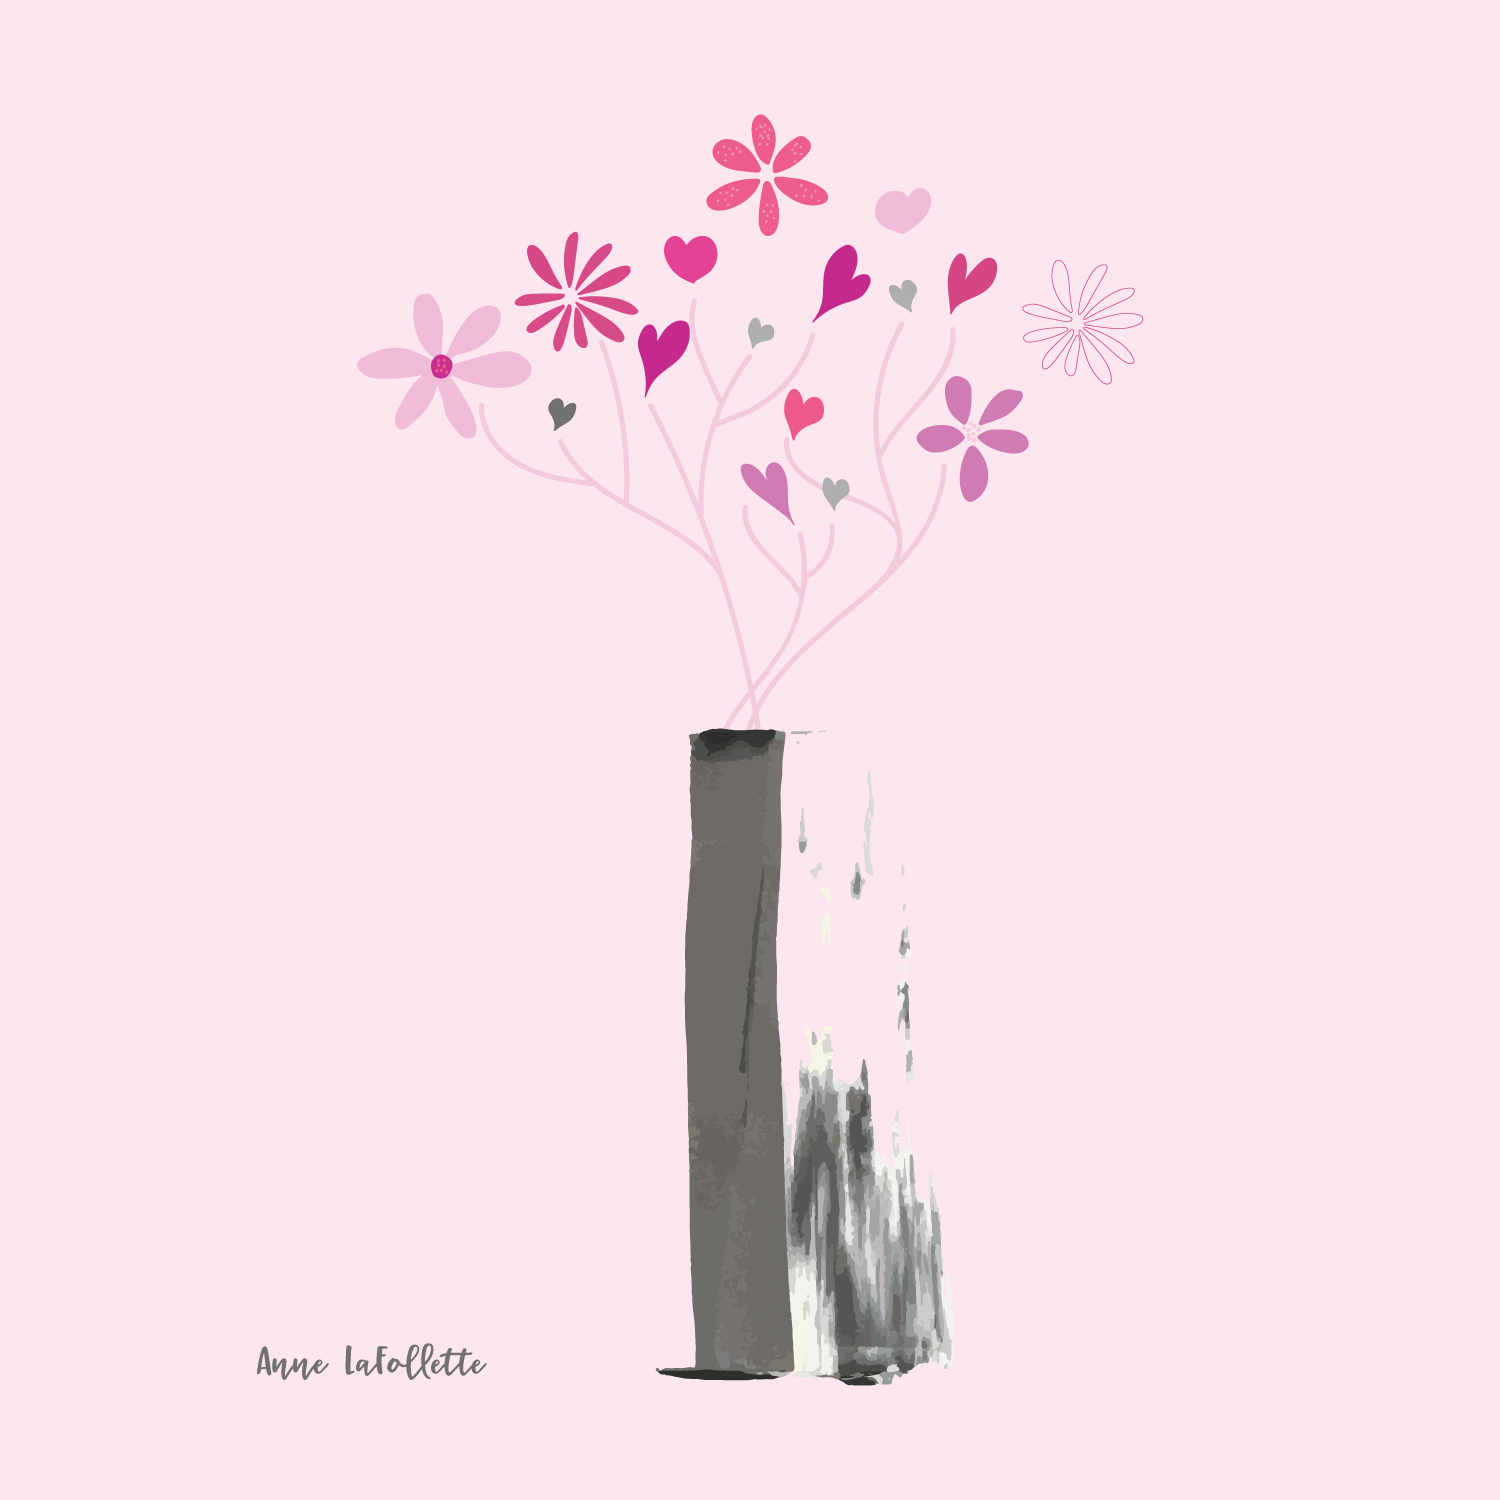 Grey-vase-with-hearts-square.jpg